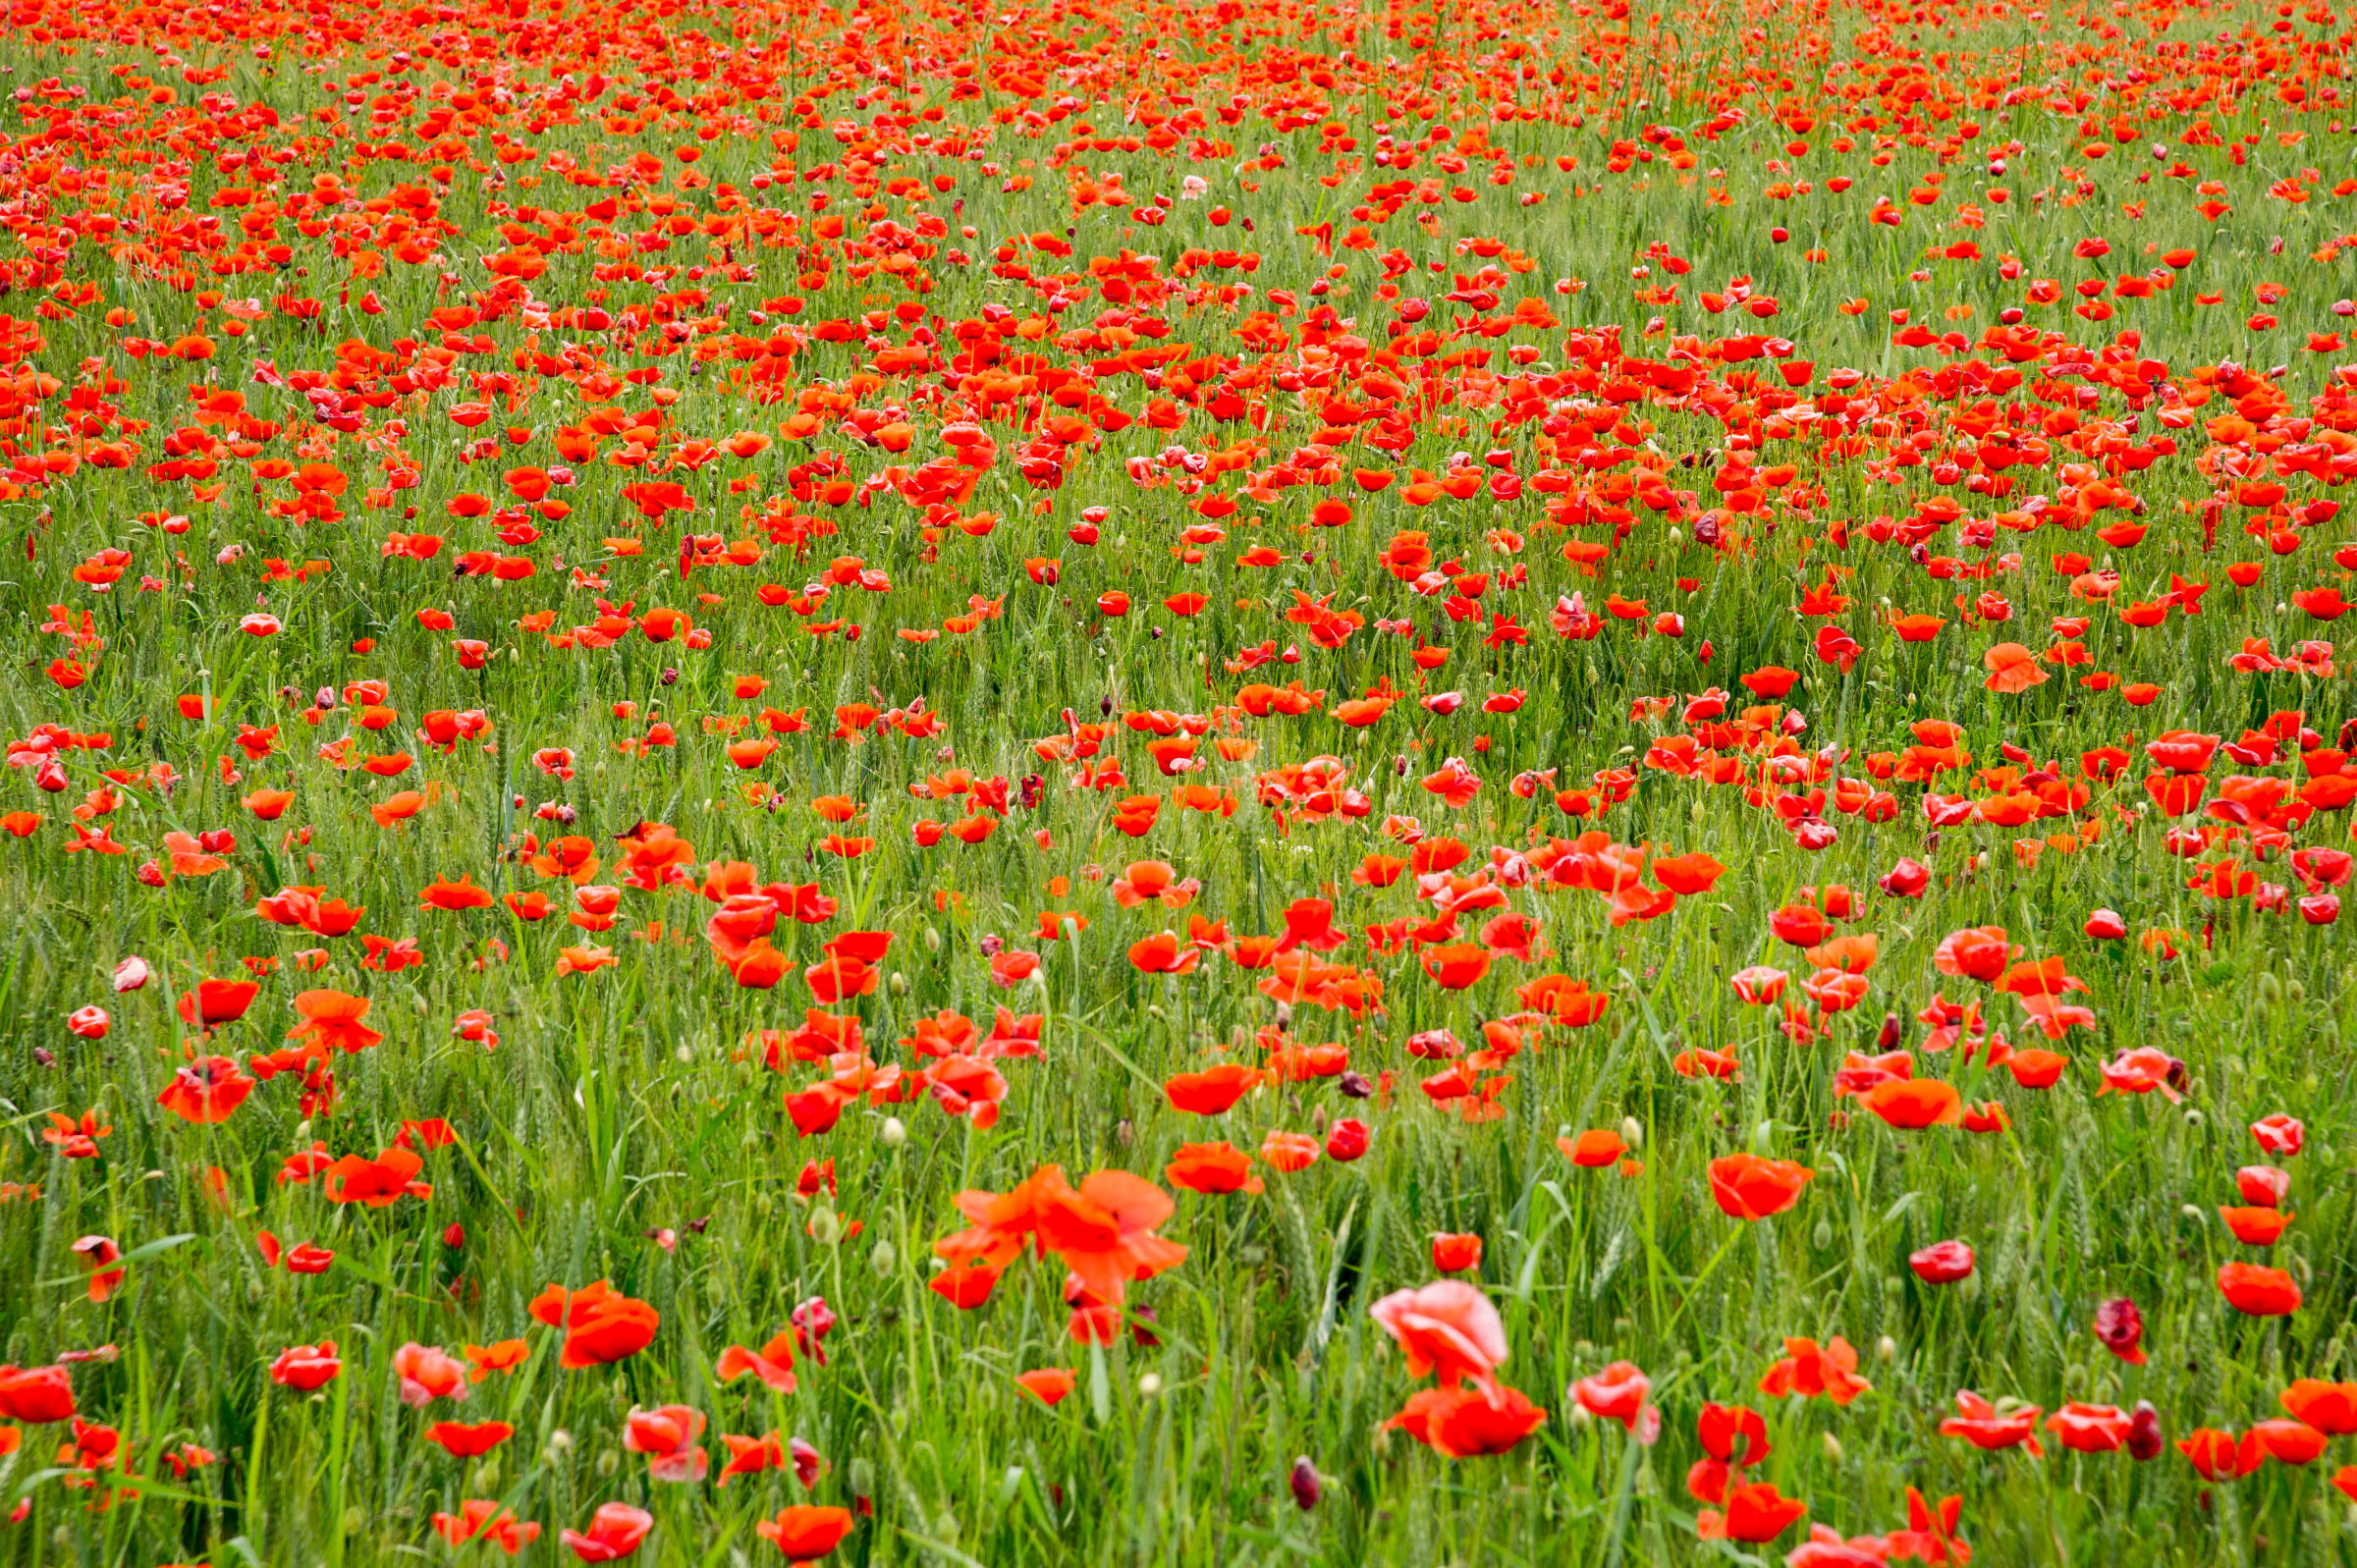 Poppies and wheat...